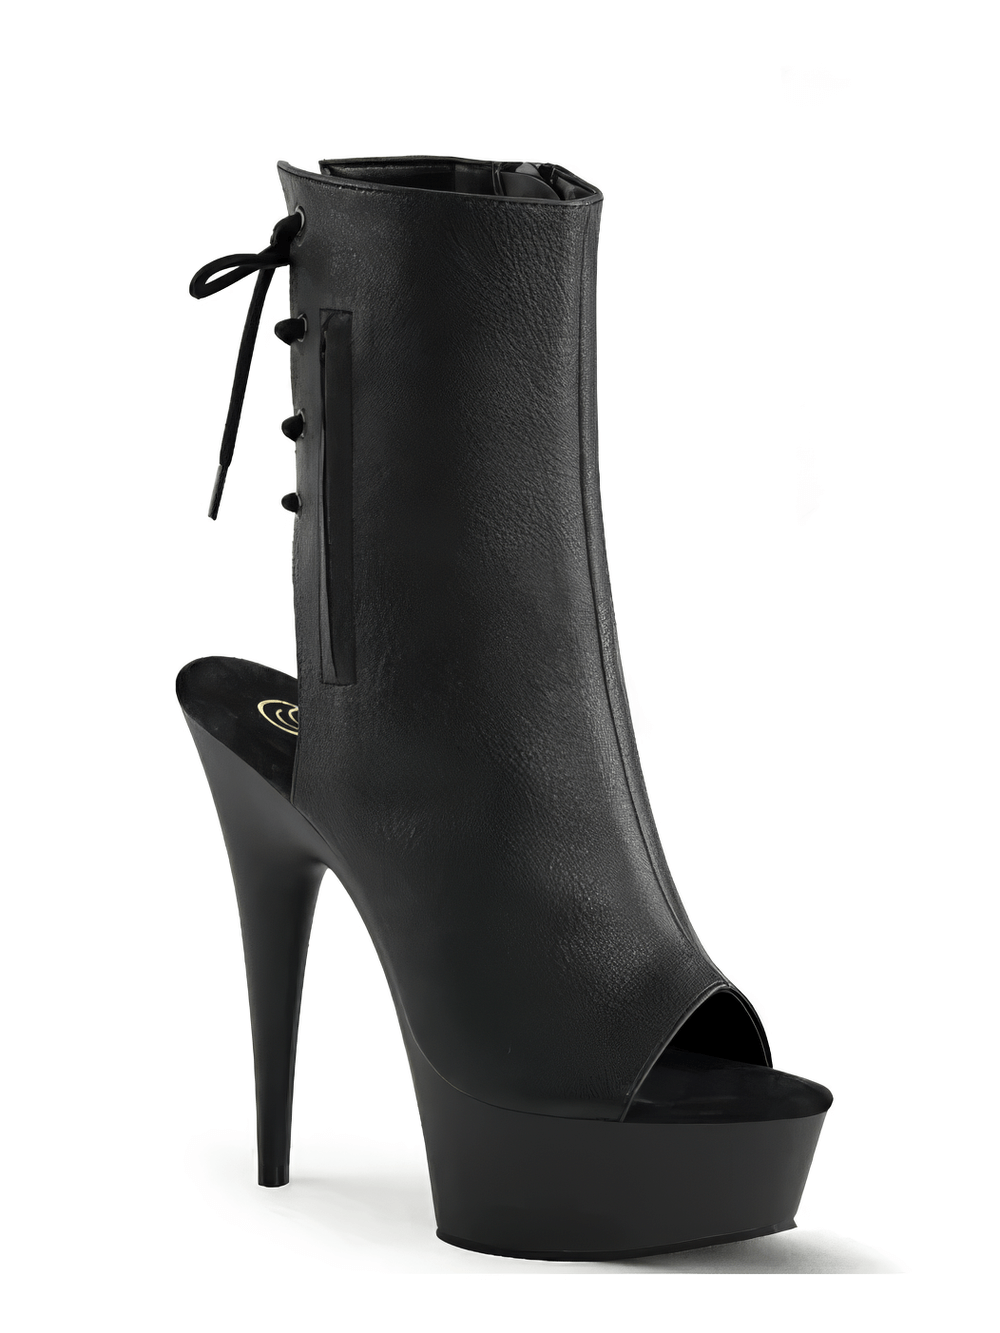 PLEASER Daring Lace-up Back Heels Shoes with Hidden Pocket